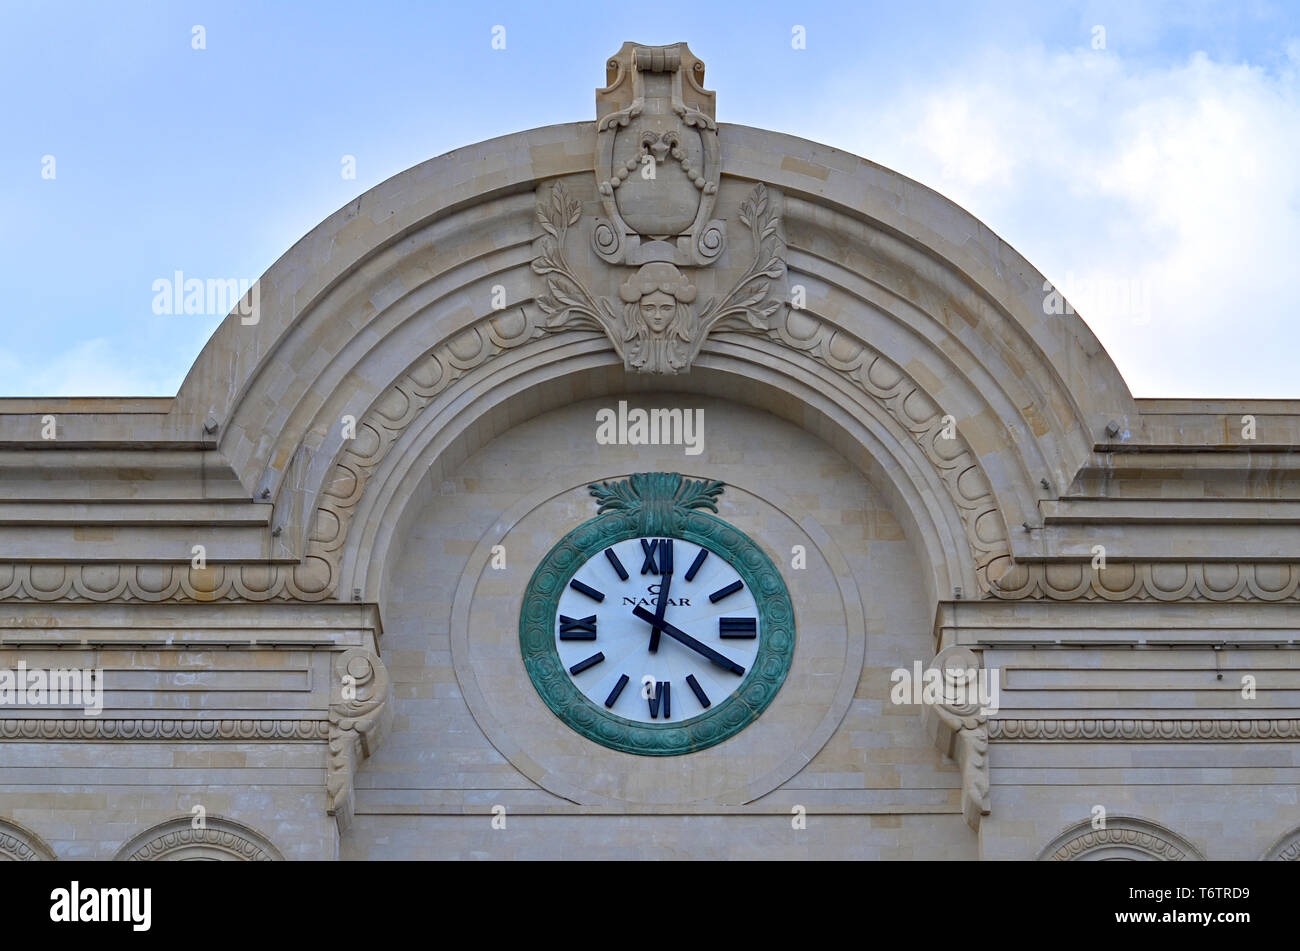 01-05-2019.Baku.Azerbaijan.A clock that resembles time in the streets, parks and city walls of Baku Stock Photo